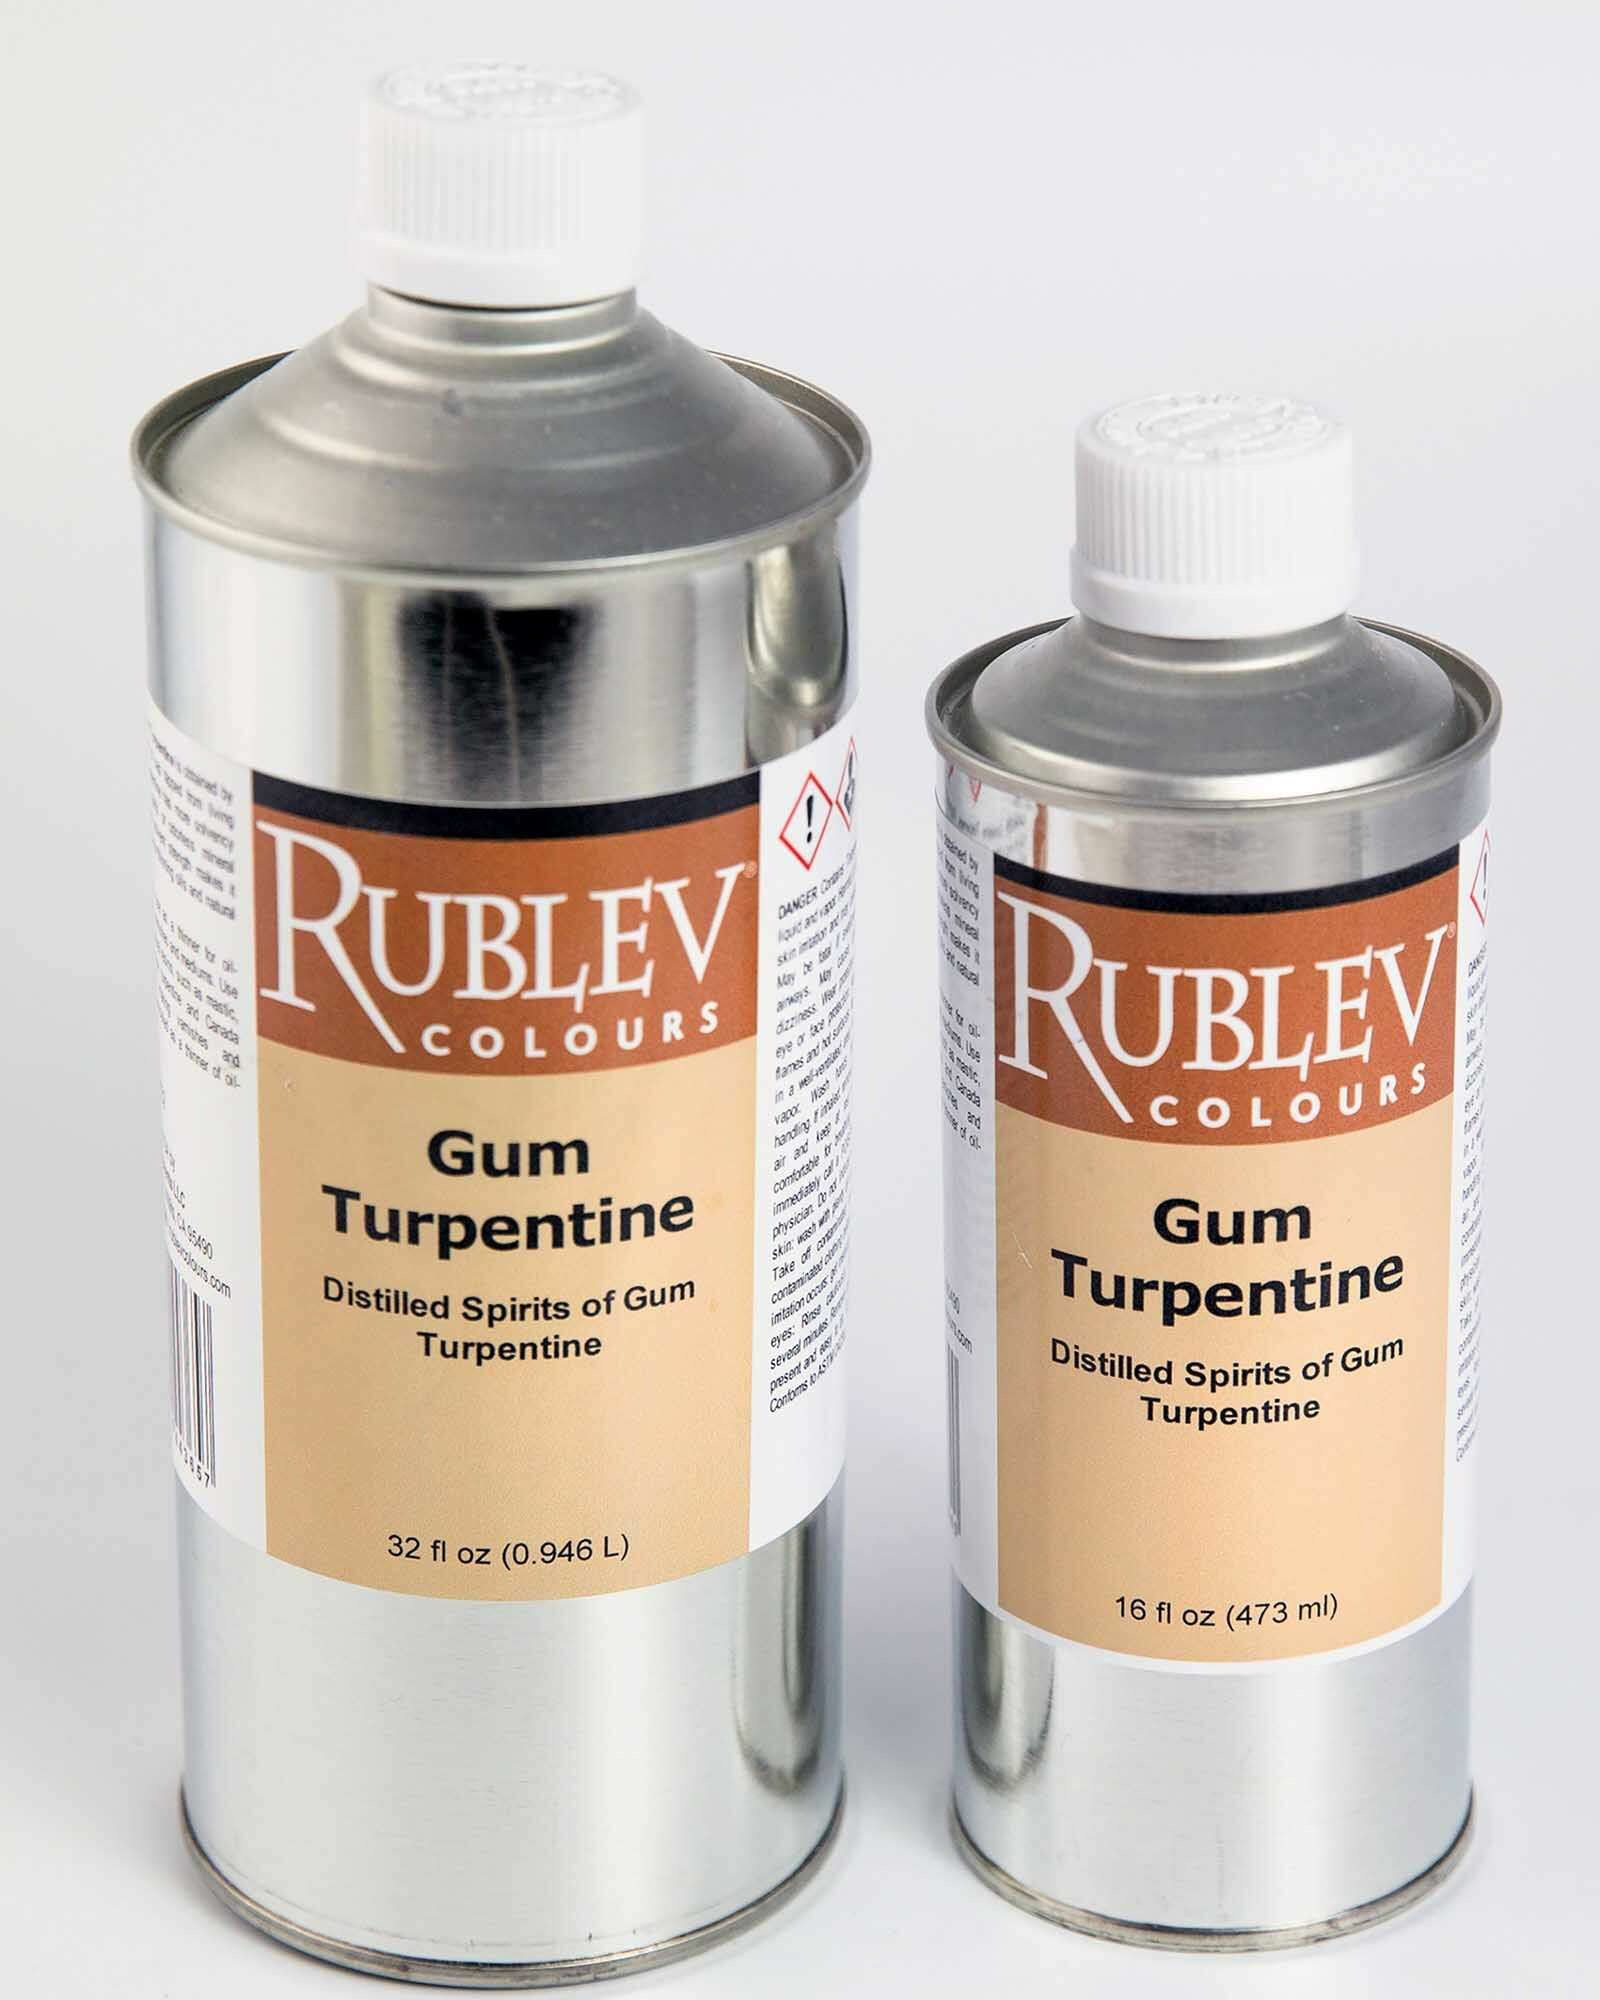 Mineral Turpentine Oil, for Paint, Varnish, Purity : 98% at Rs 88